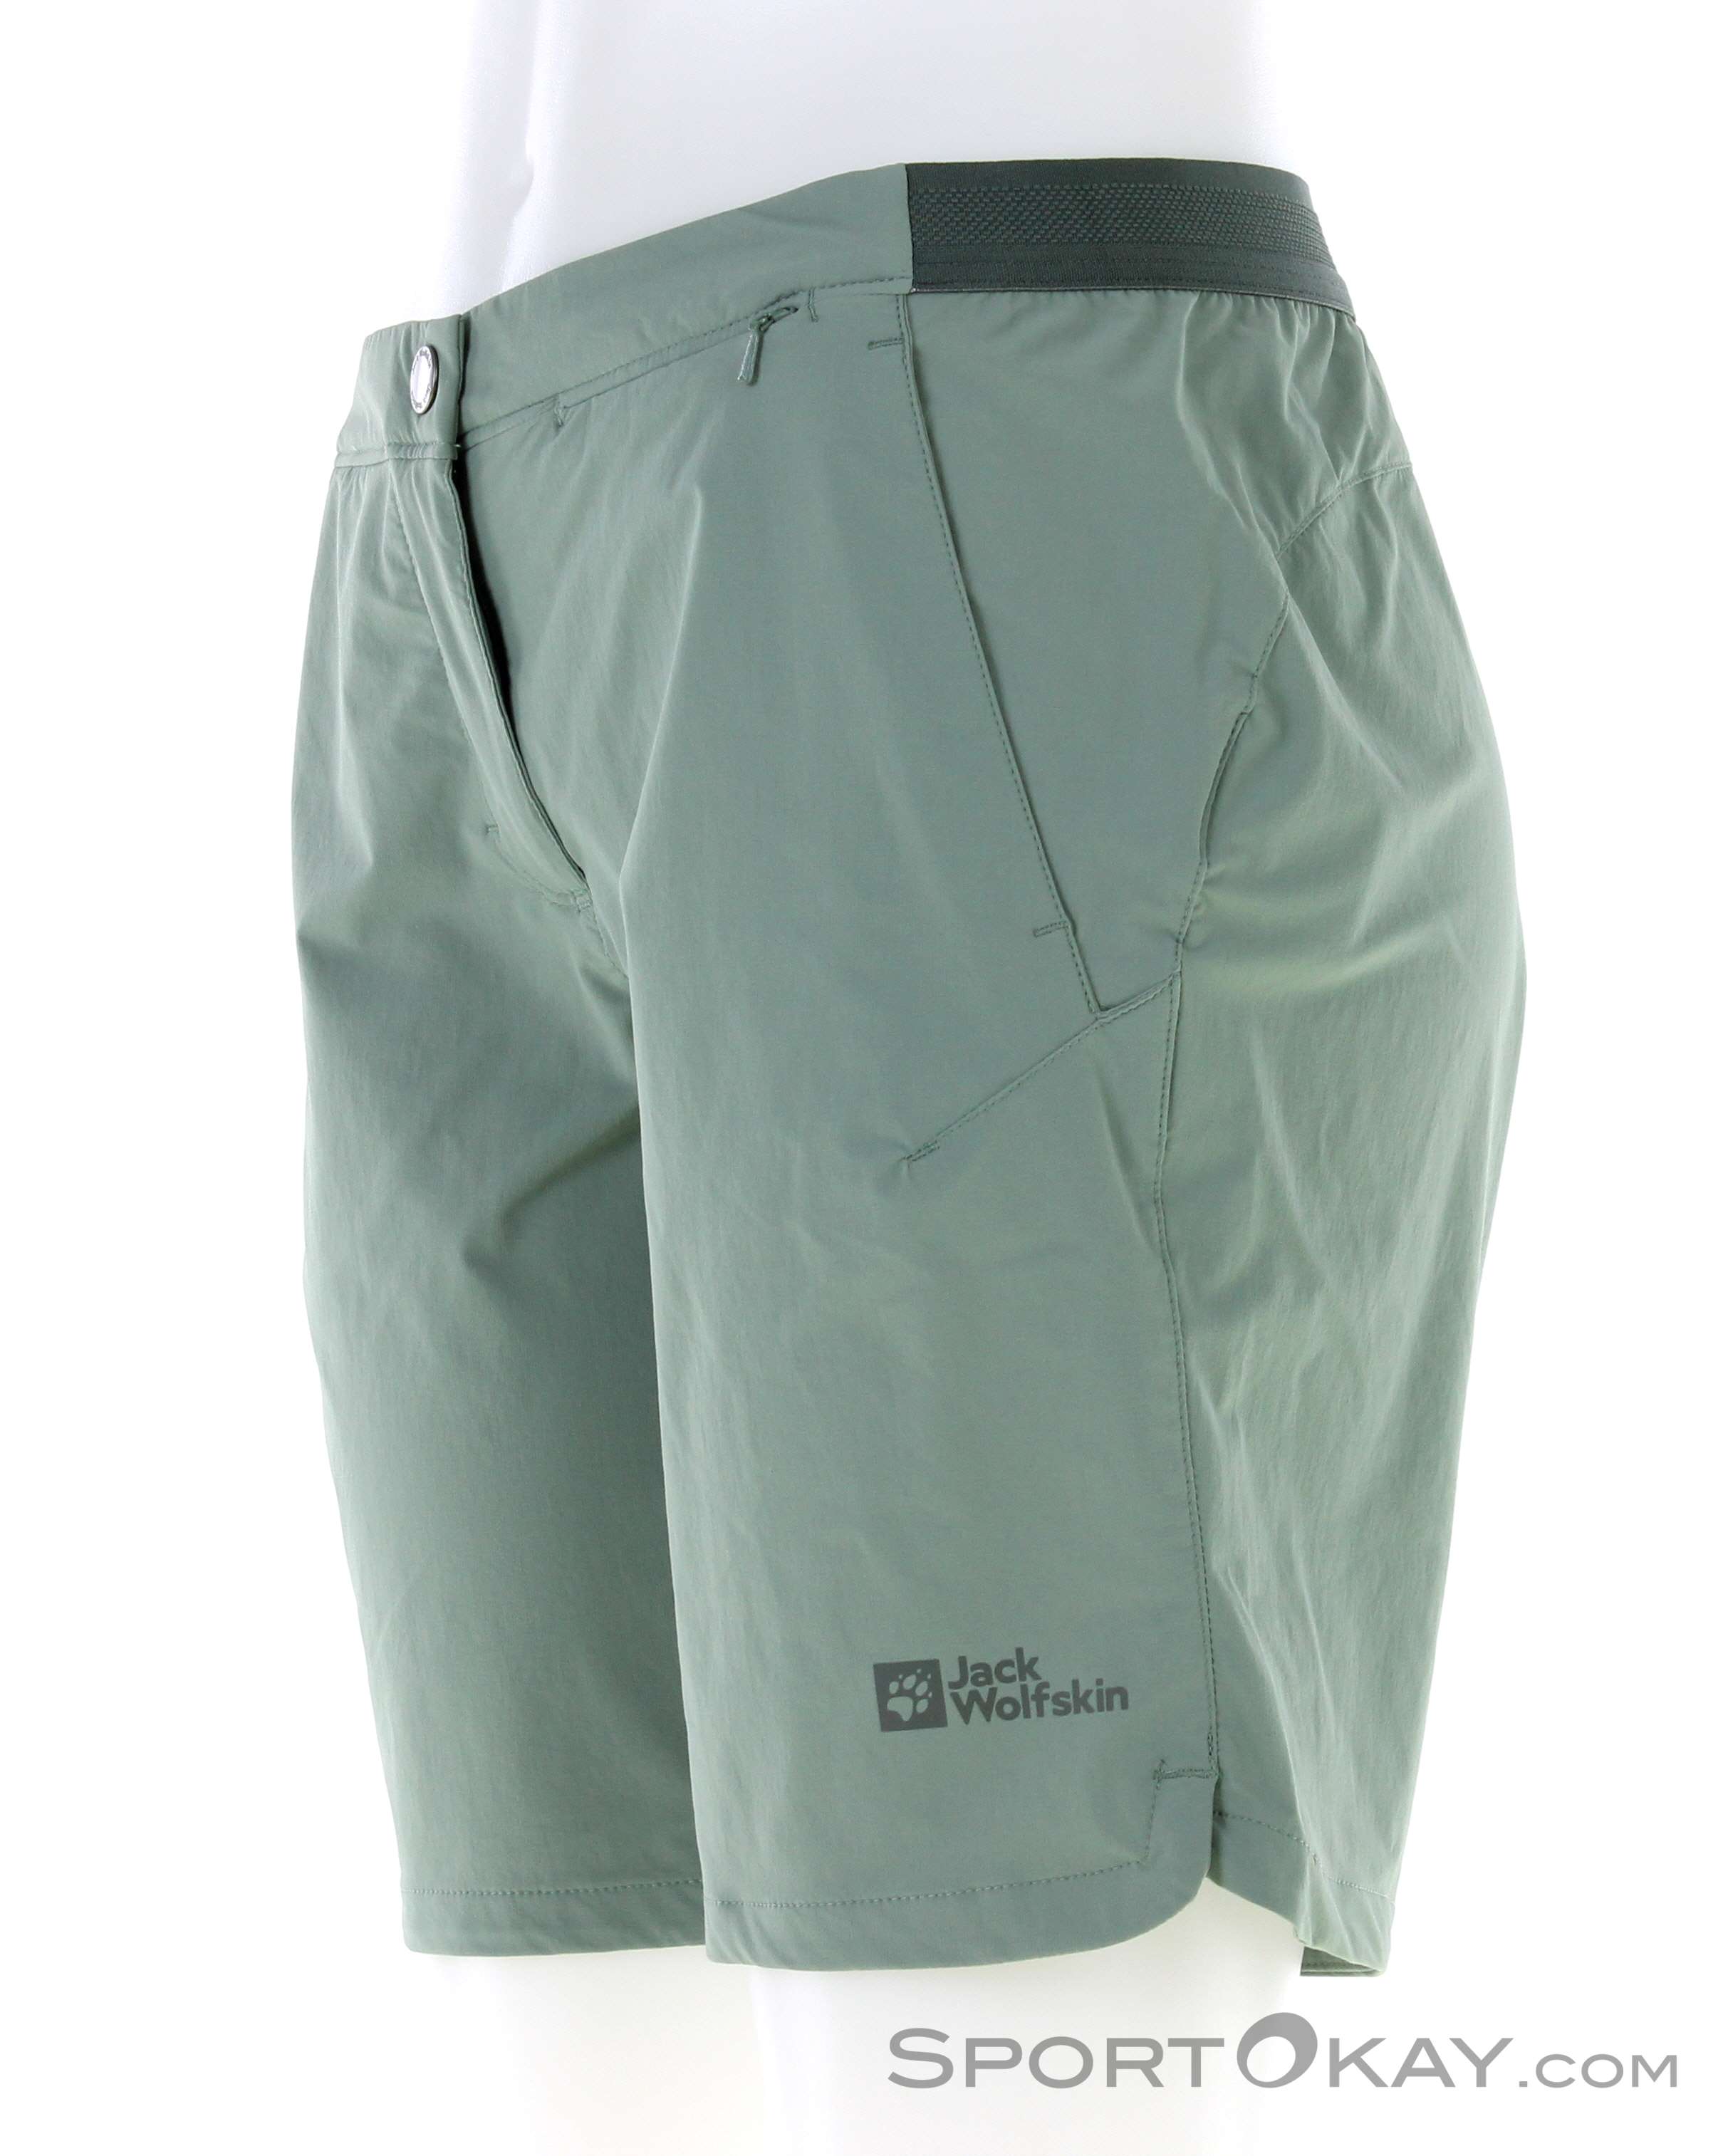 Jack Wolfskin Hilltop Trail All Women Clothing Outdoor - Outdoor - Outdoor Pants - - Shorts